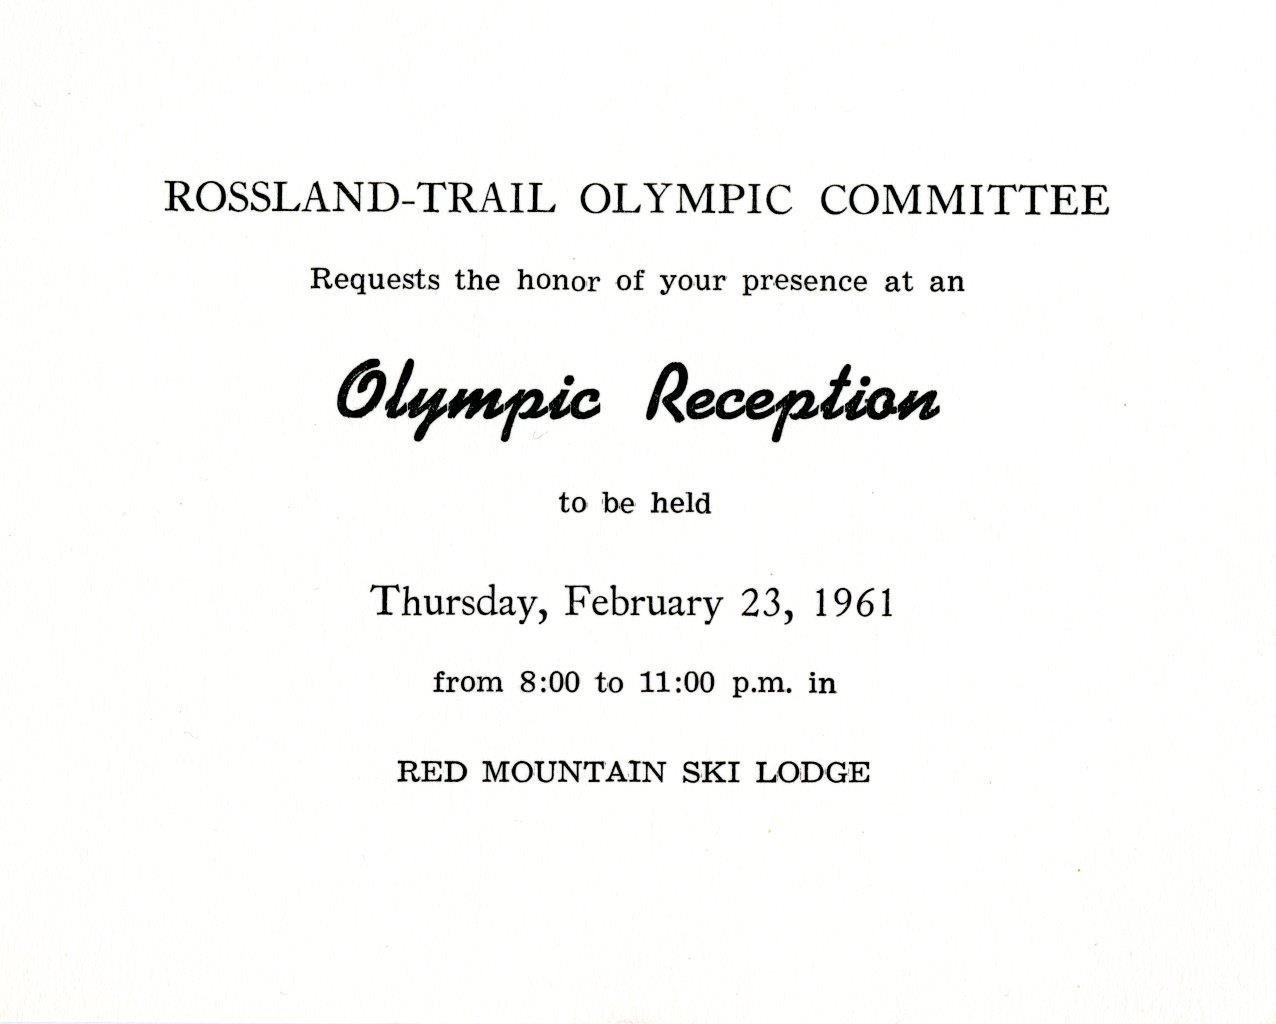 Rossland-Trail Olympic Committee Reception Invitation